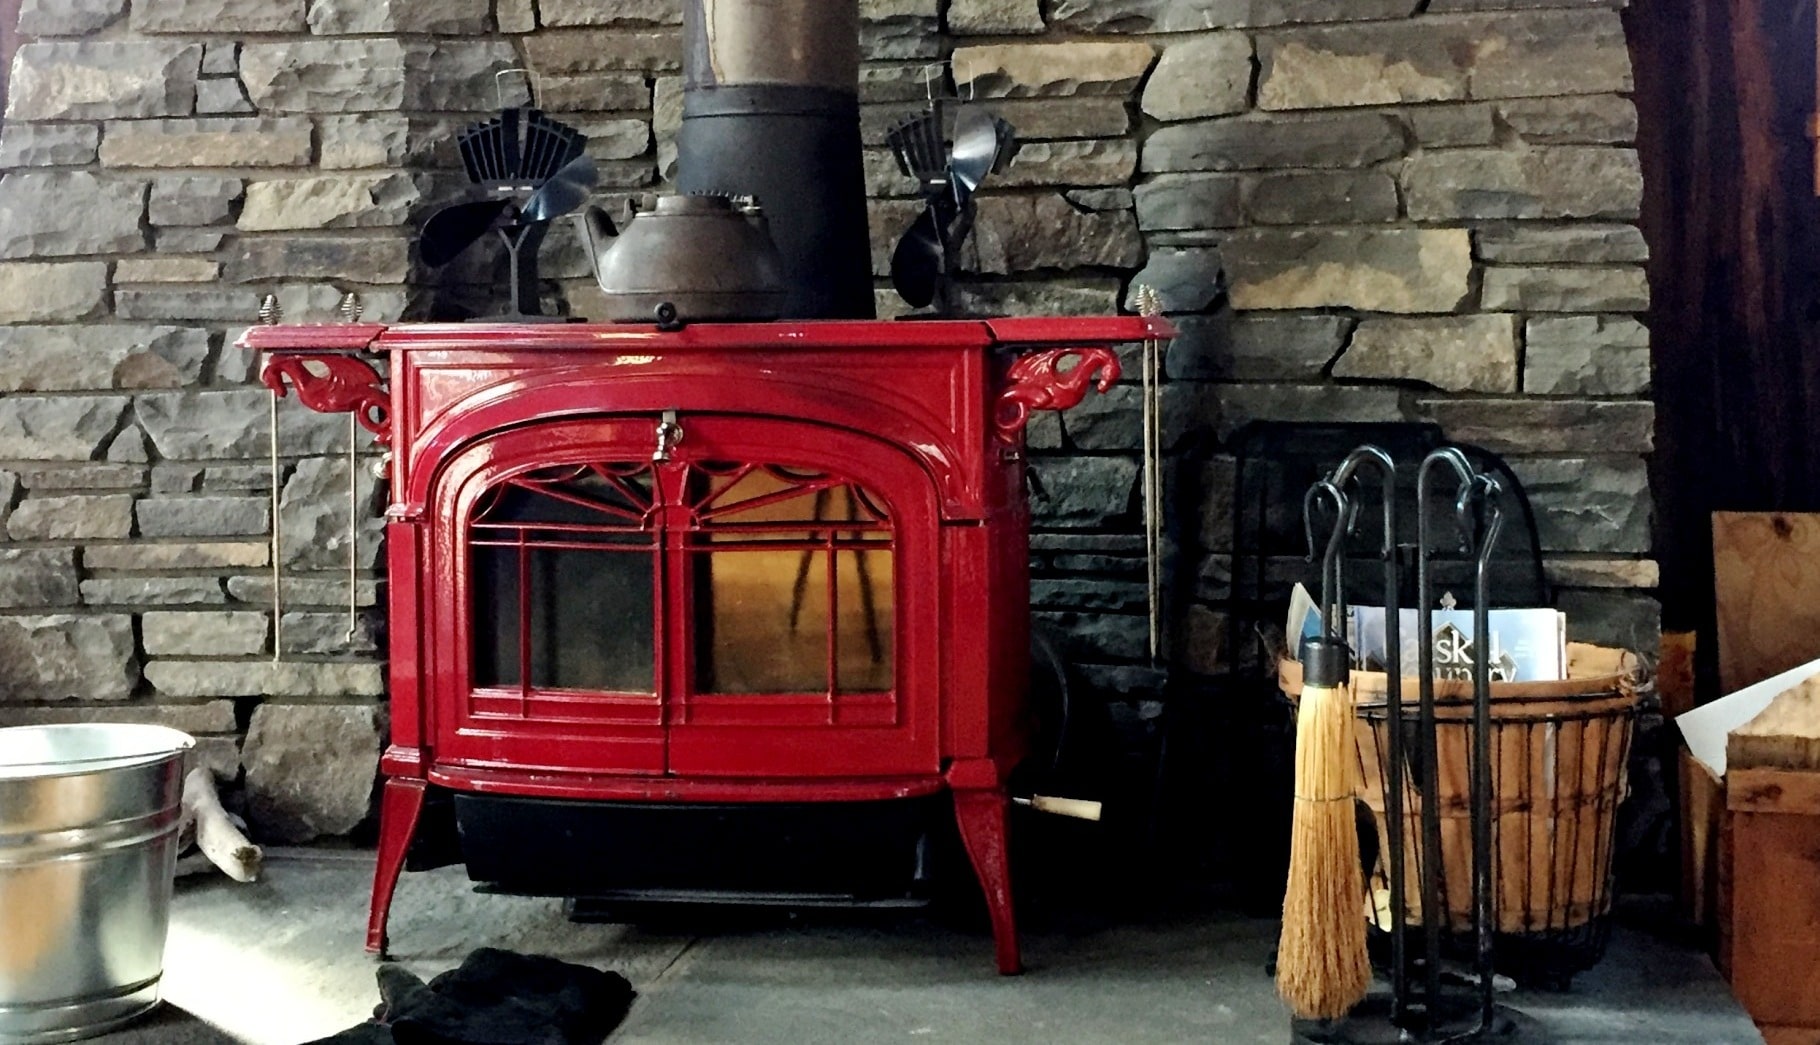 Warm Up in front of the beautiful wood stove!